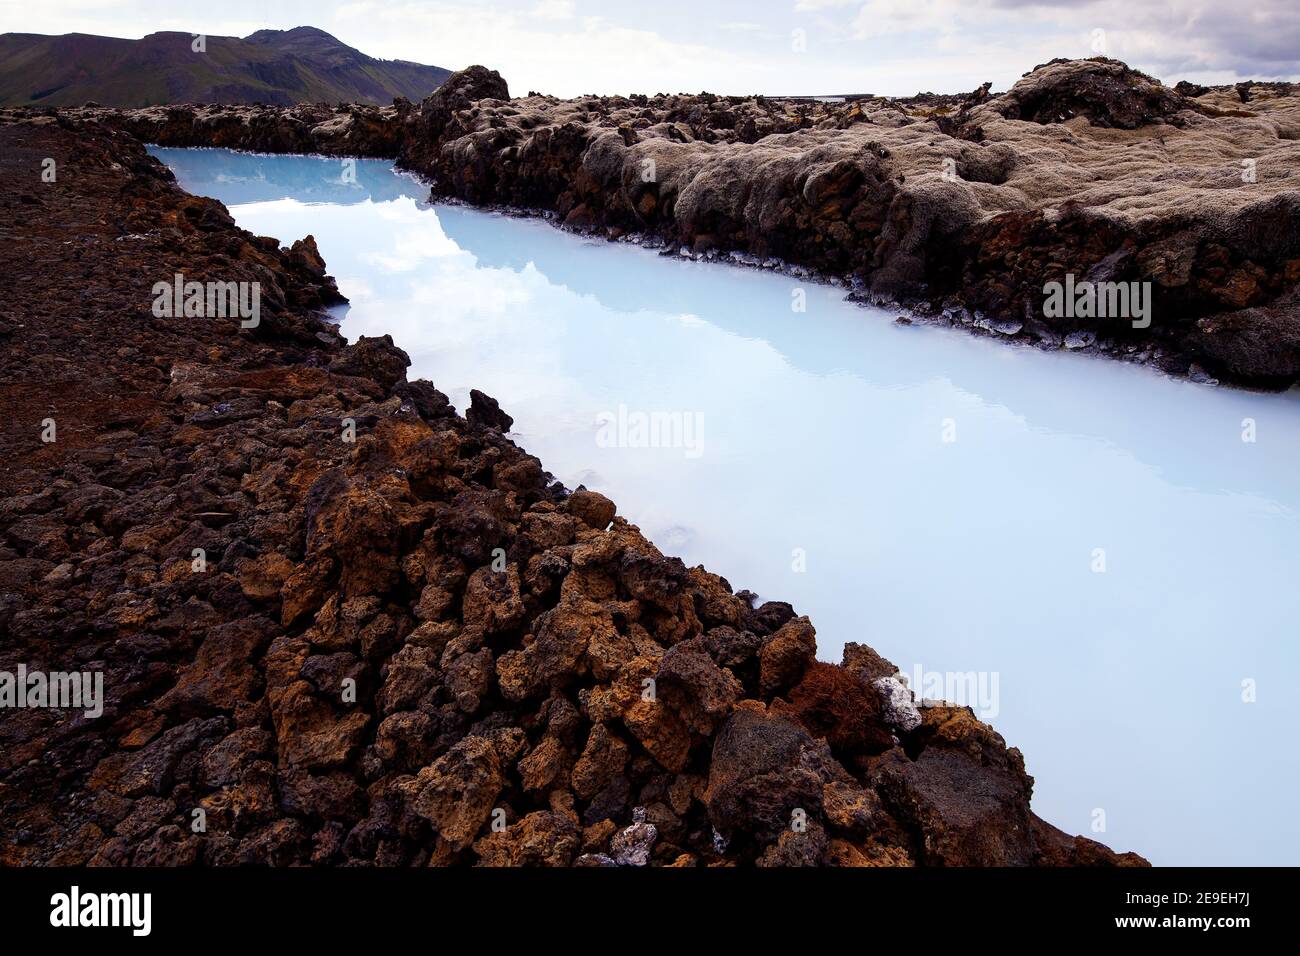 Blue Lagoon (Icelandic: 'Bláa lónið') geothermal spa is one of the most visited attractions in Iceland. Stock Photo